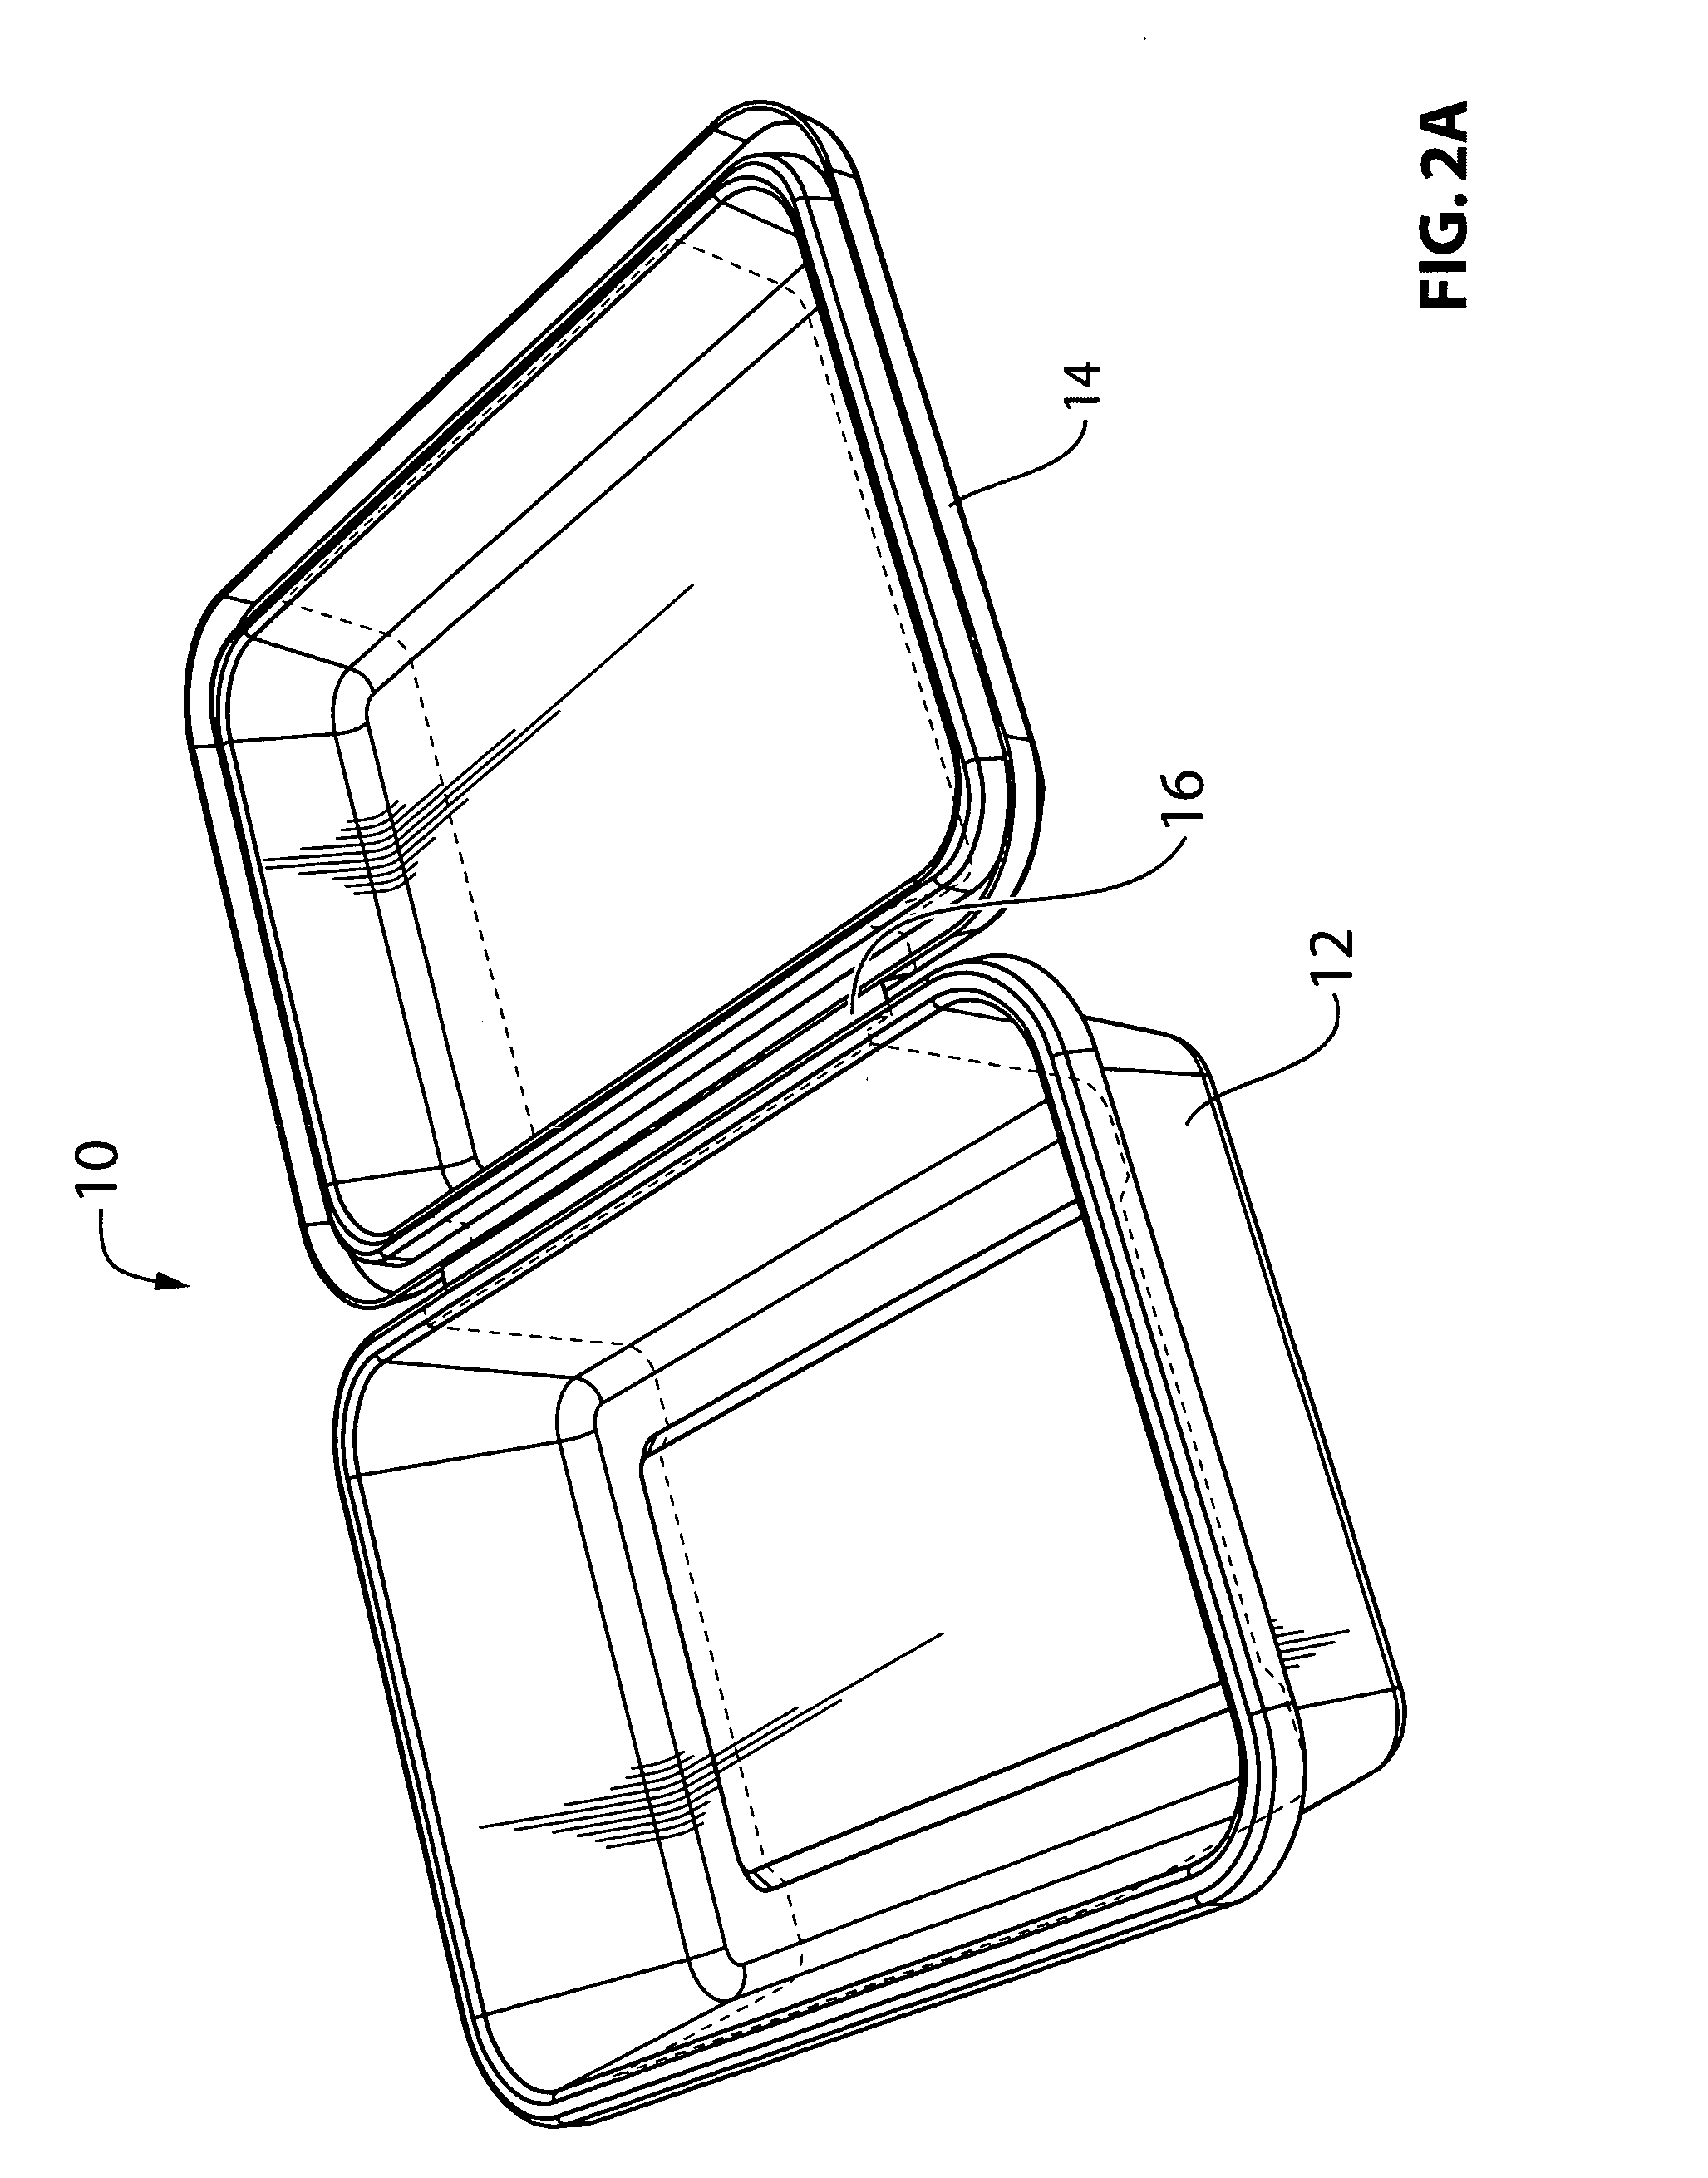 Injection moulded clam shell container utilizing label as hinge element